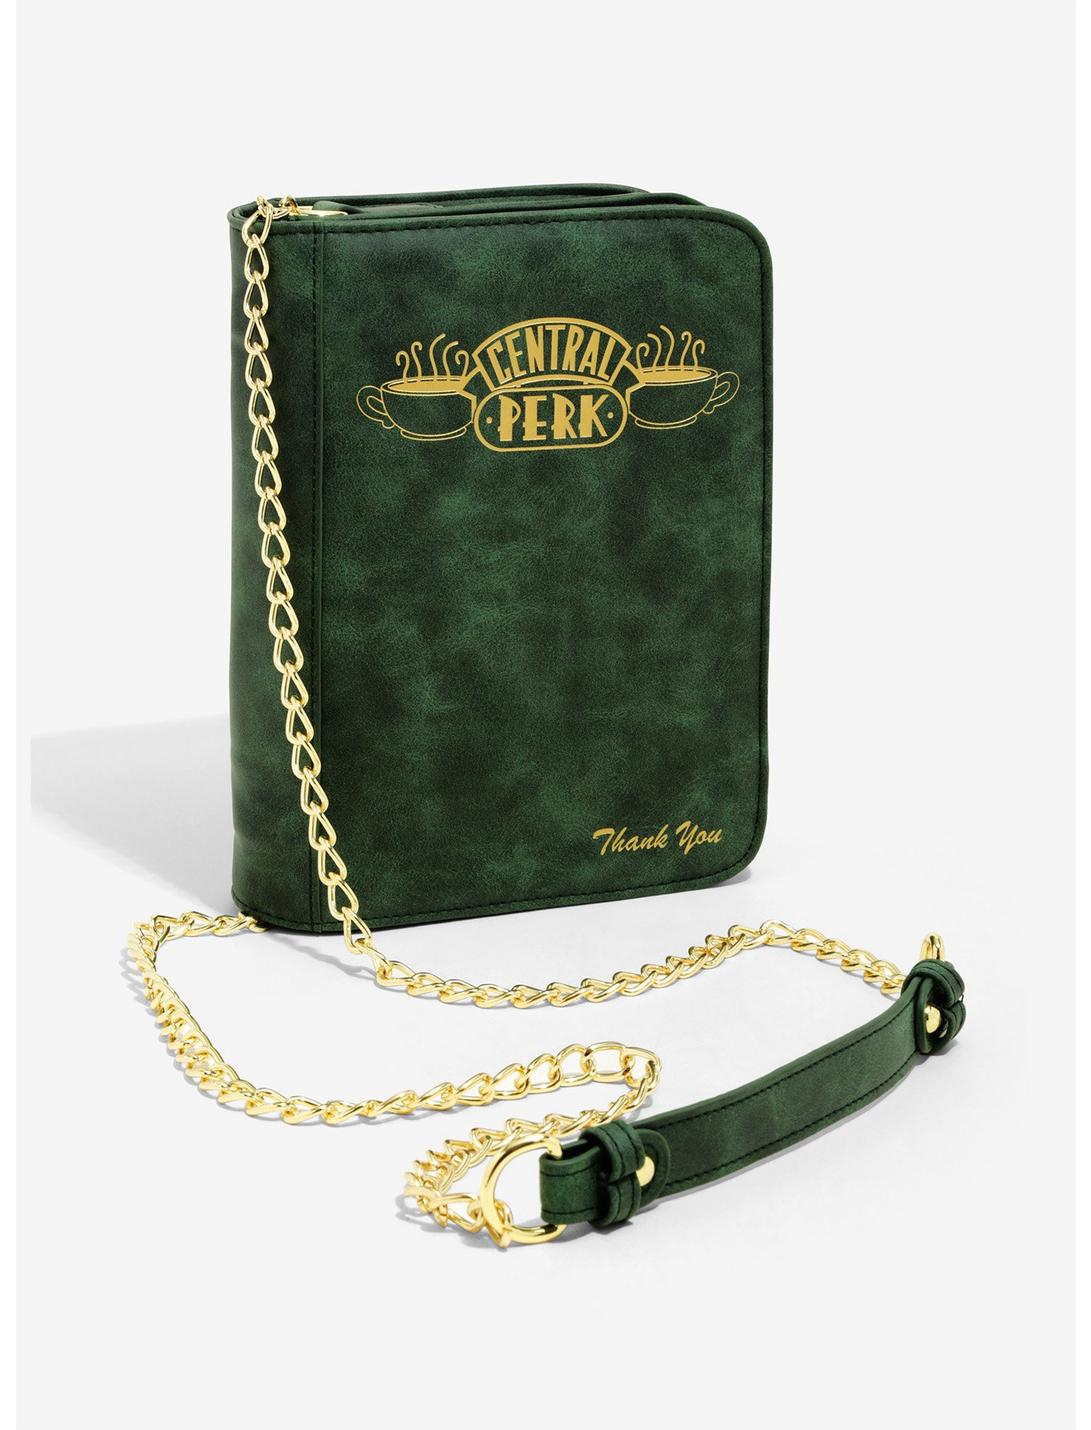 Interesting Justice skull Friends Central Perk Crossbody Bag - BoxLunch Exclusive | BoxLunch